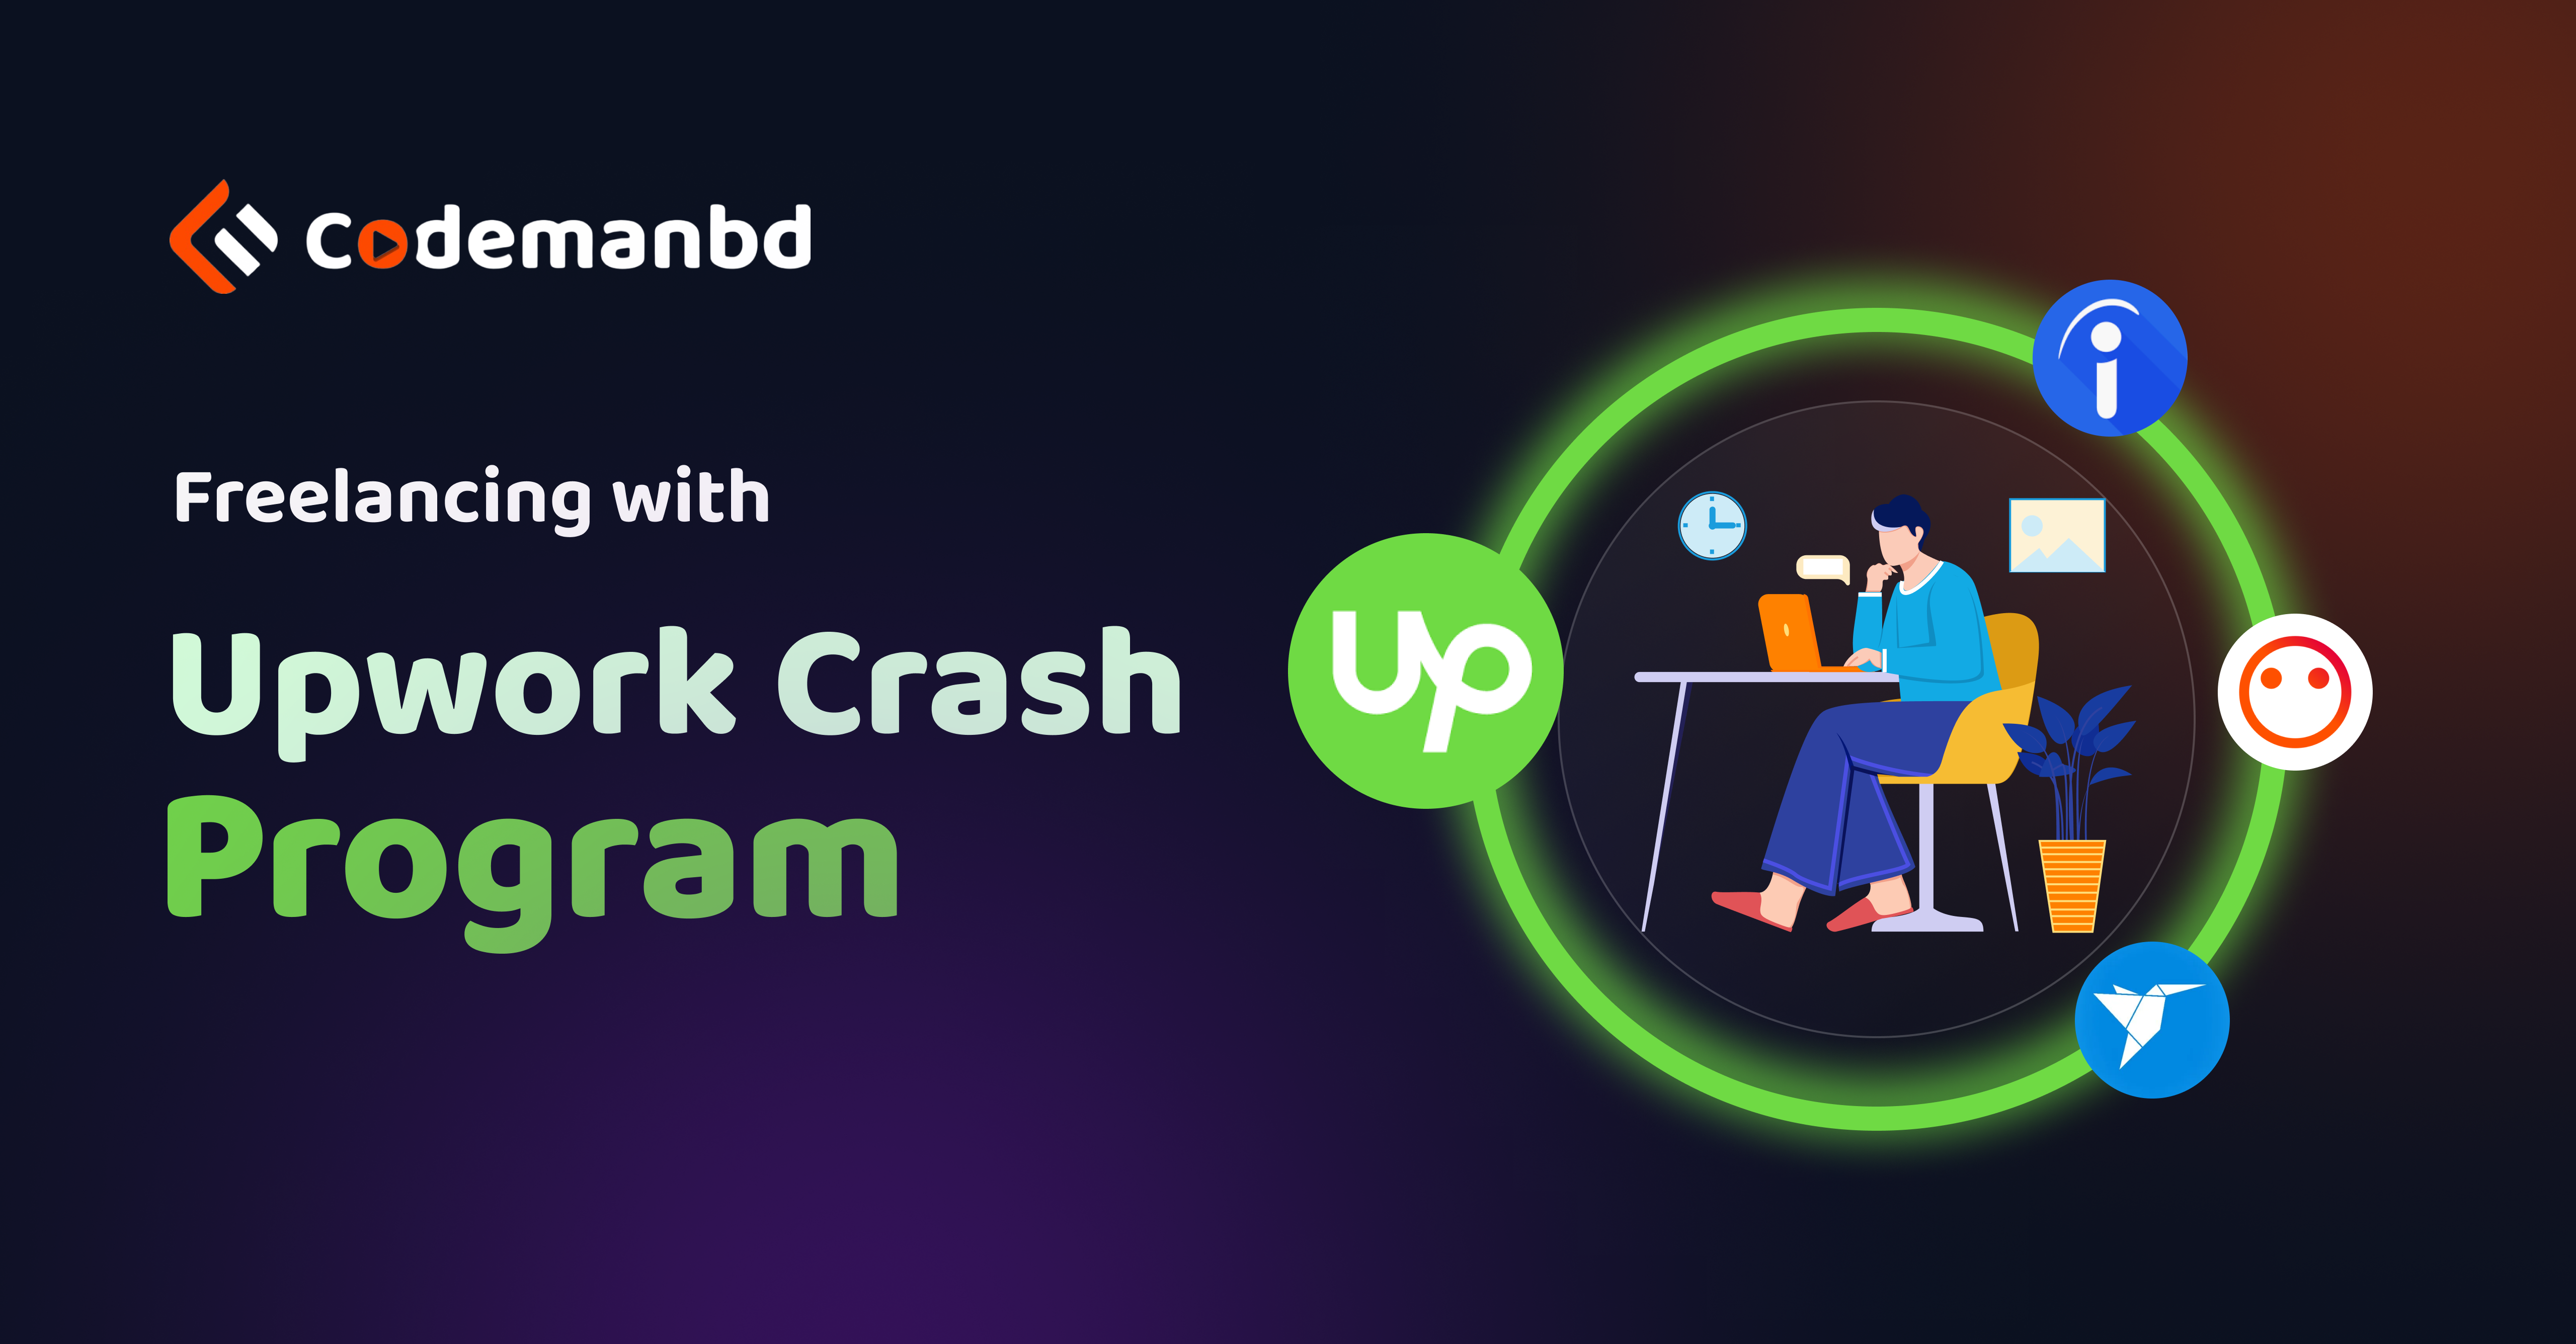 Freelancing with Upwork Crash Program offered by Codemanbd the best freelancing learning and IT center in Bangladesh